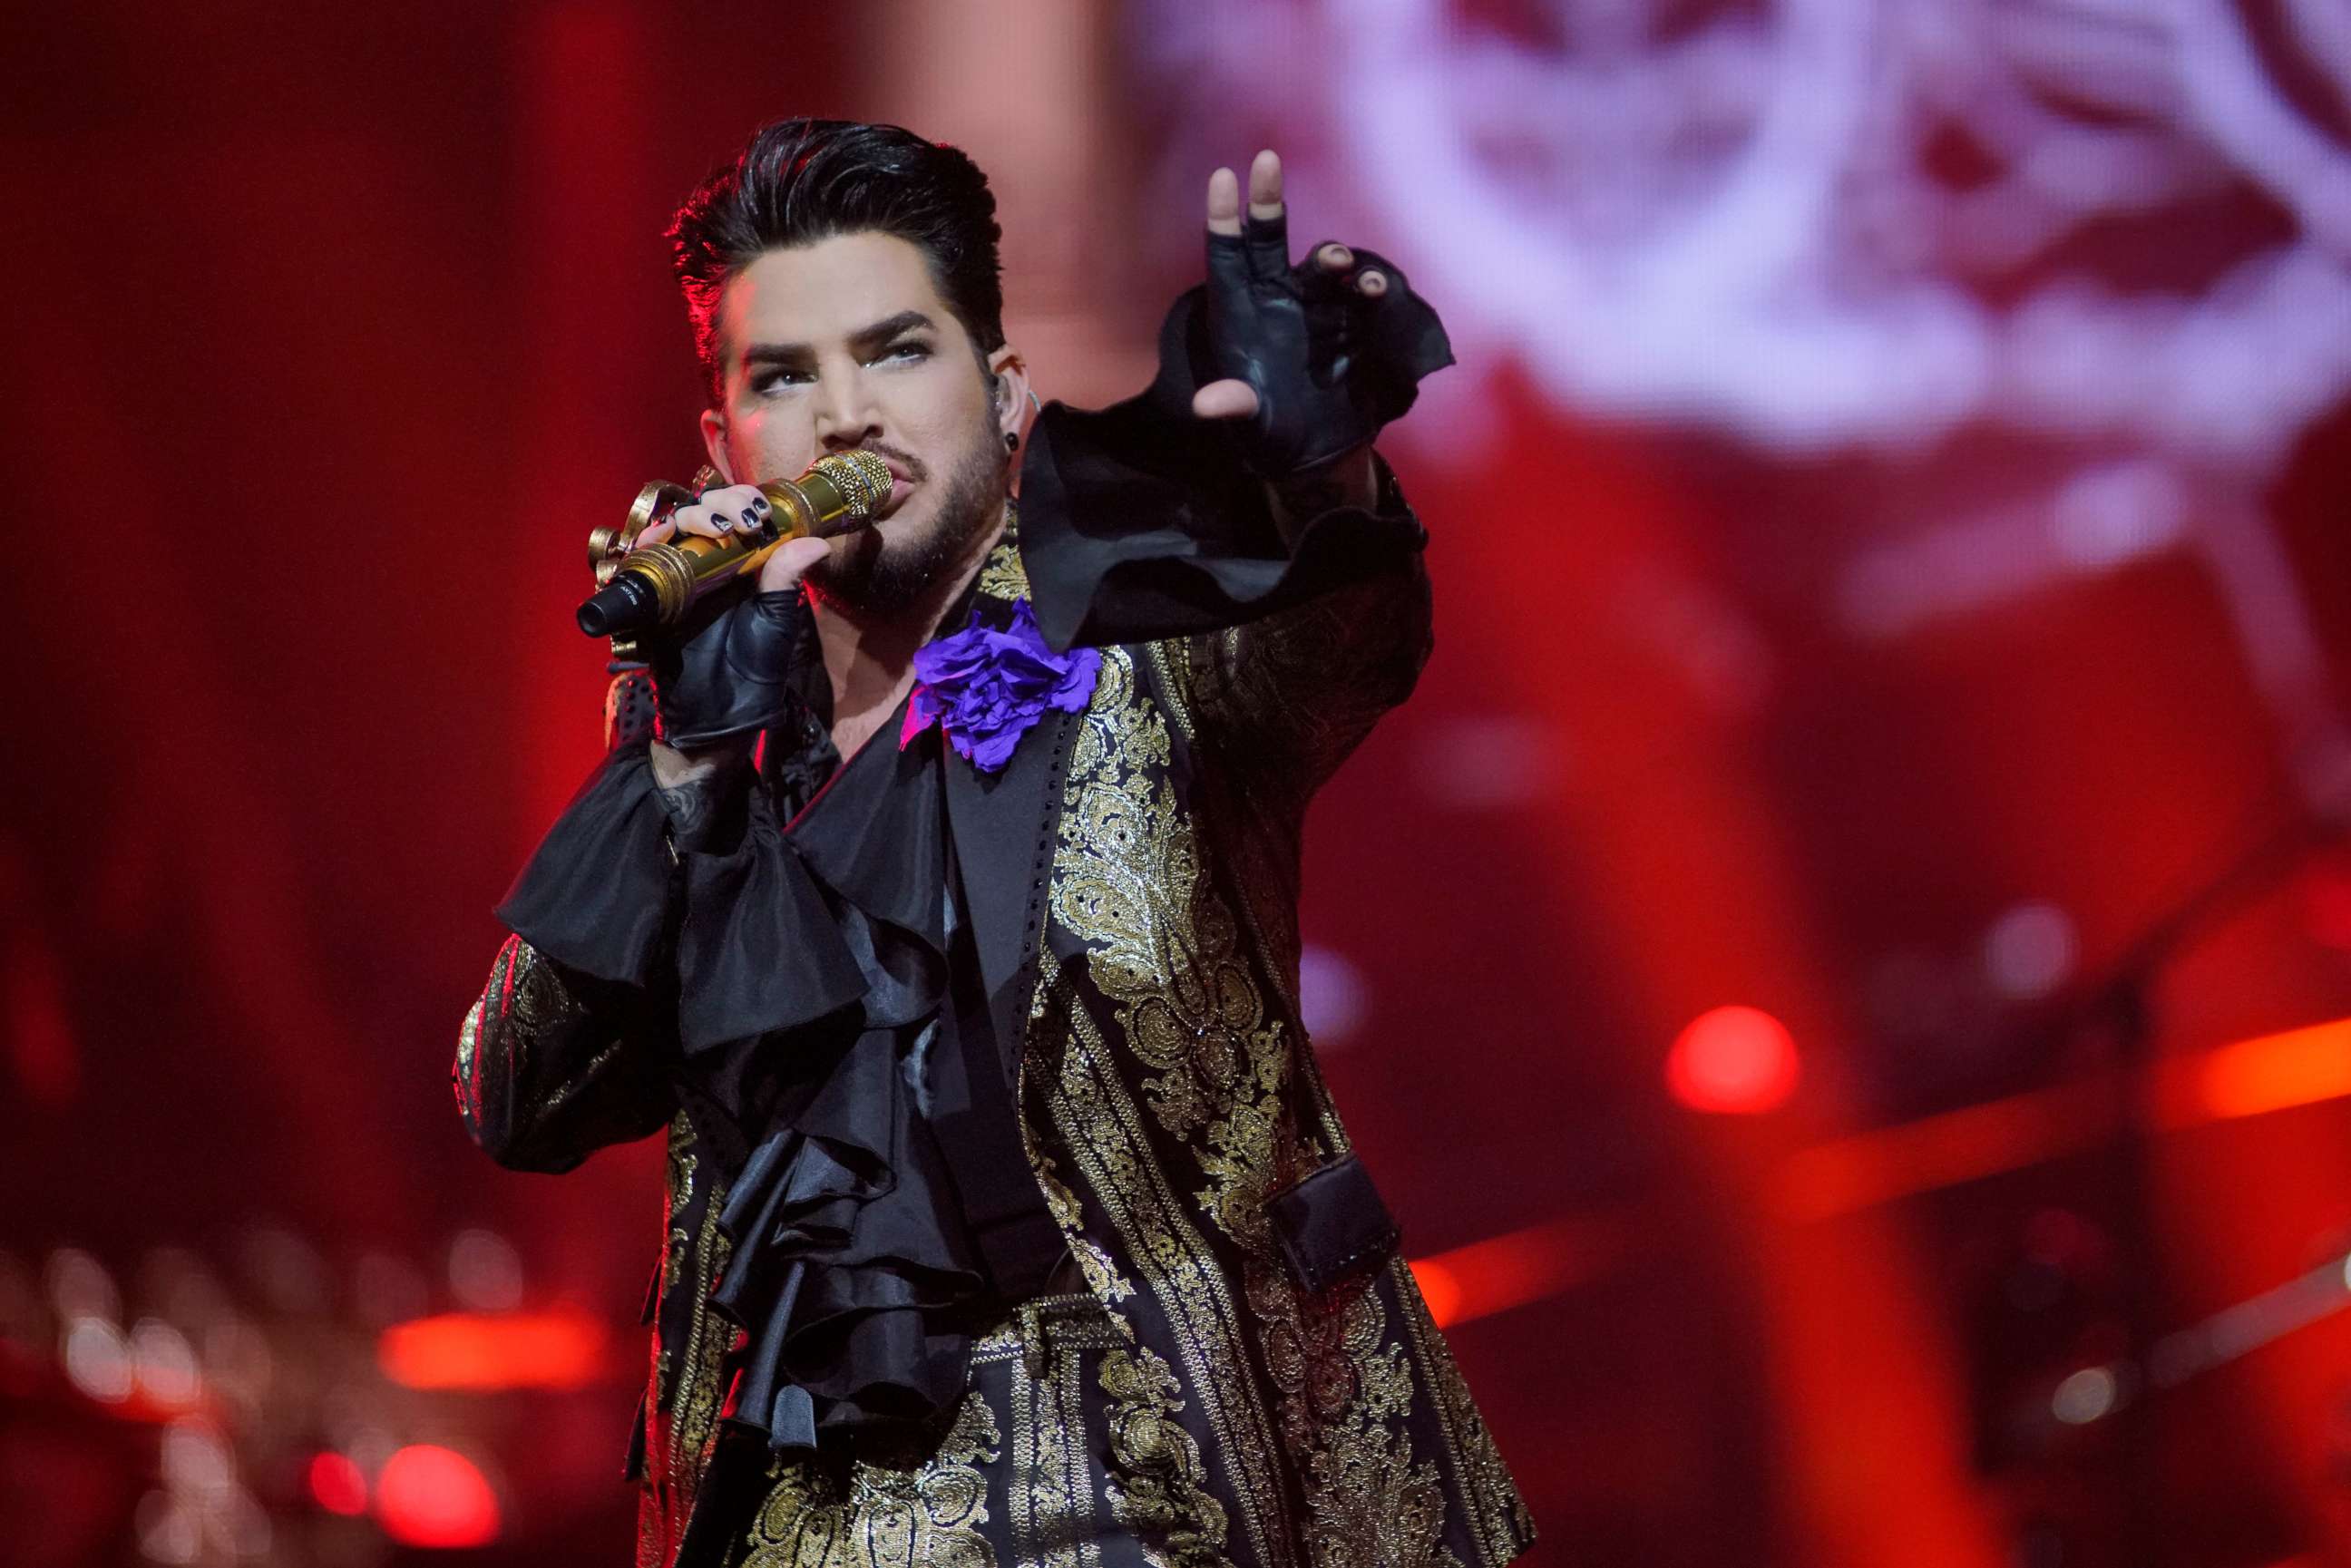 PHOTO: Adam Lambert of Queen + Adam Lambert performs at the United Center on Friday, Aug. 9, 2019, in Chicago. He was one of several celebrities targeted for burglaries in California, authorities said.